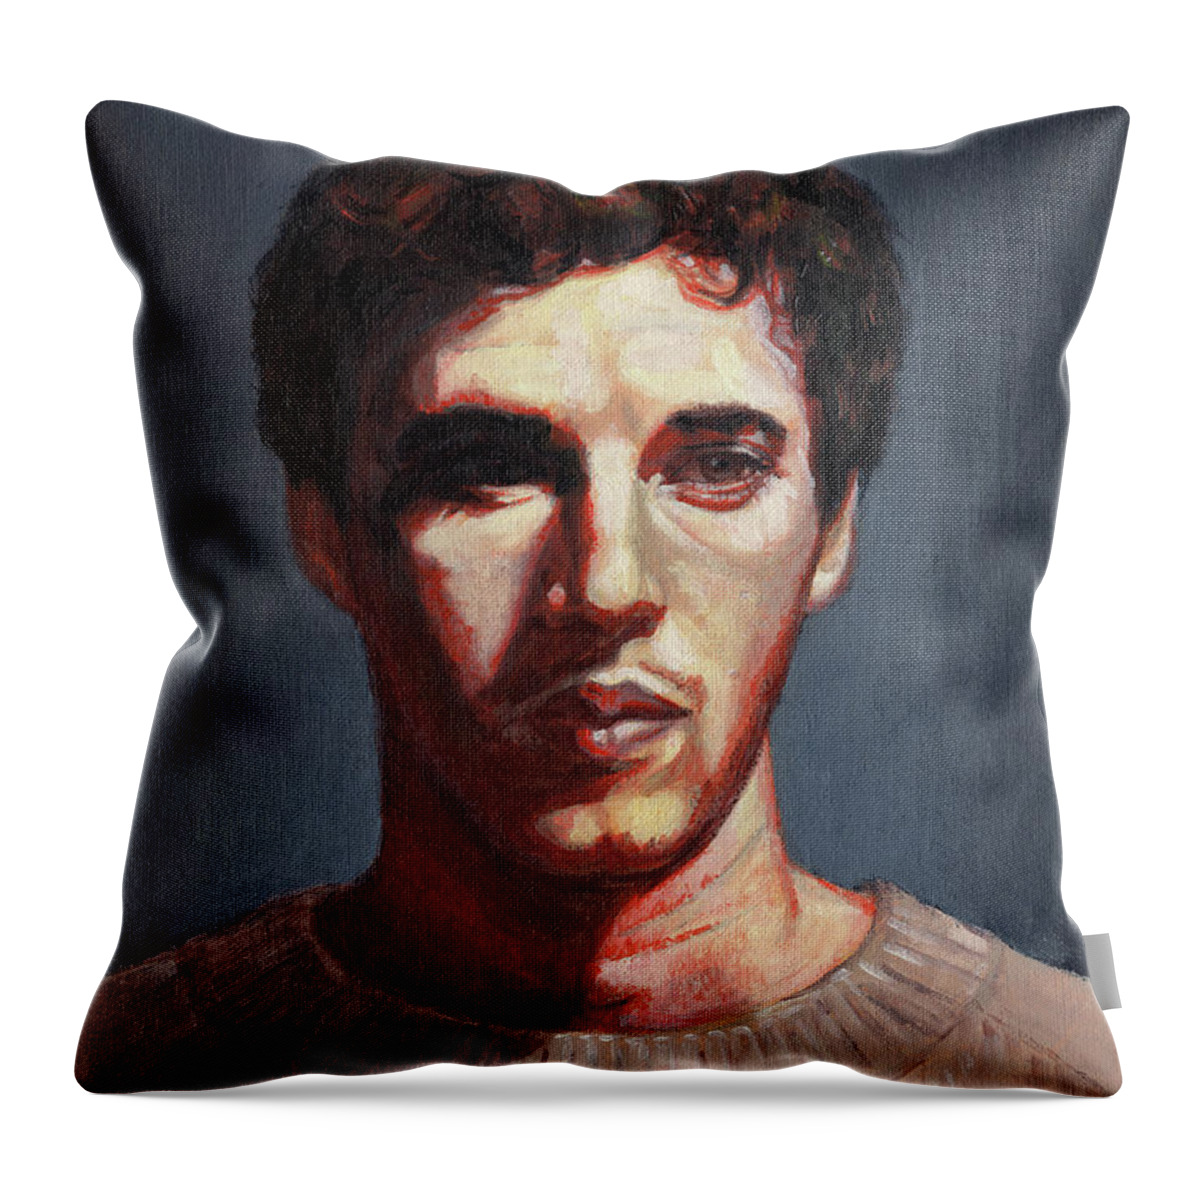 Adult Throw Pillow featuring the painting Samuel by Masha Batkova